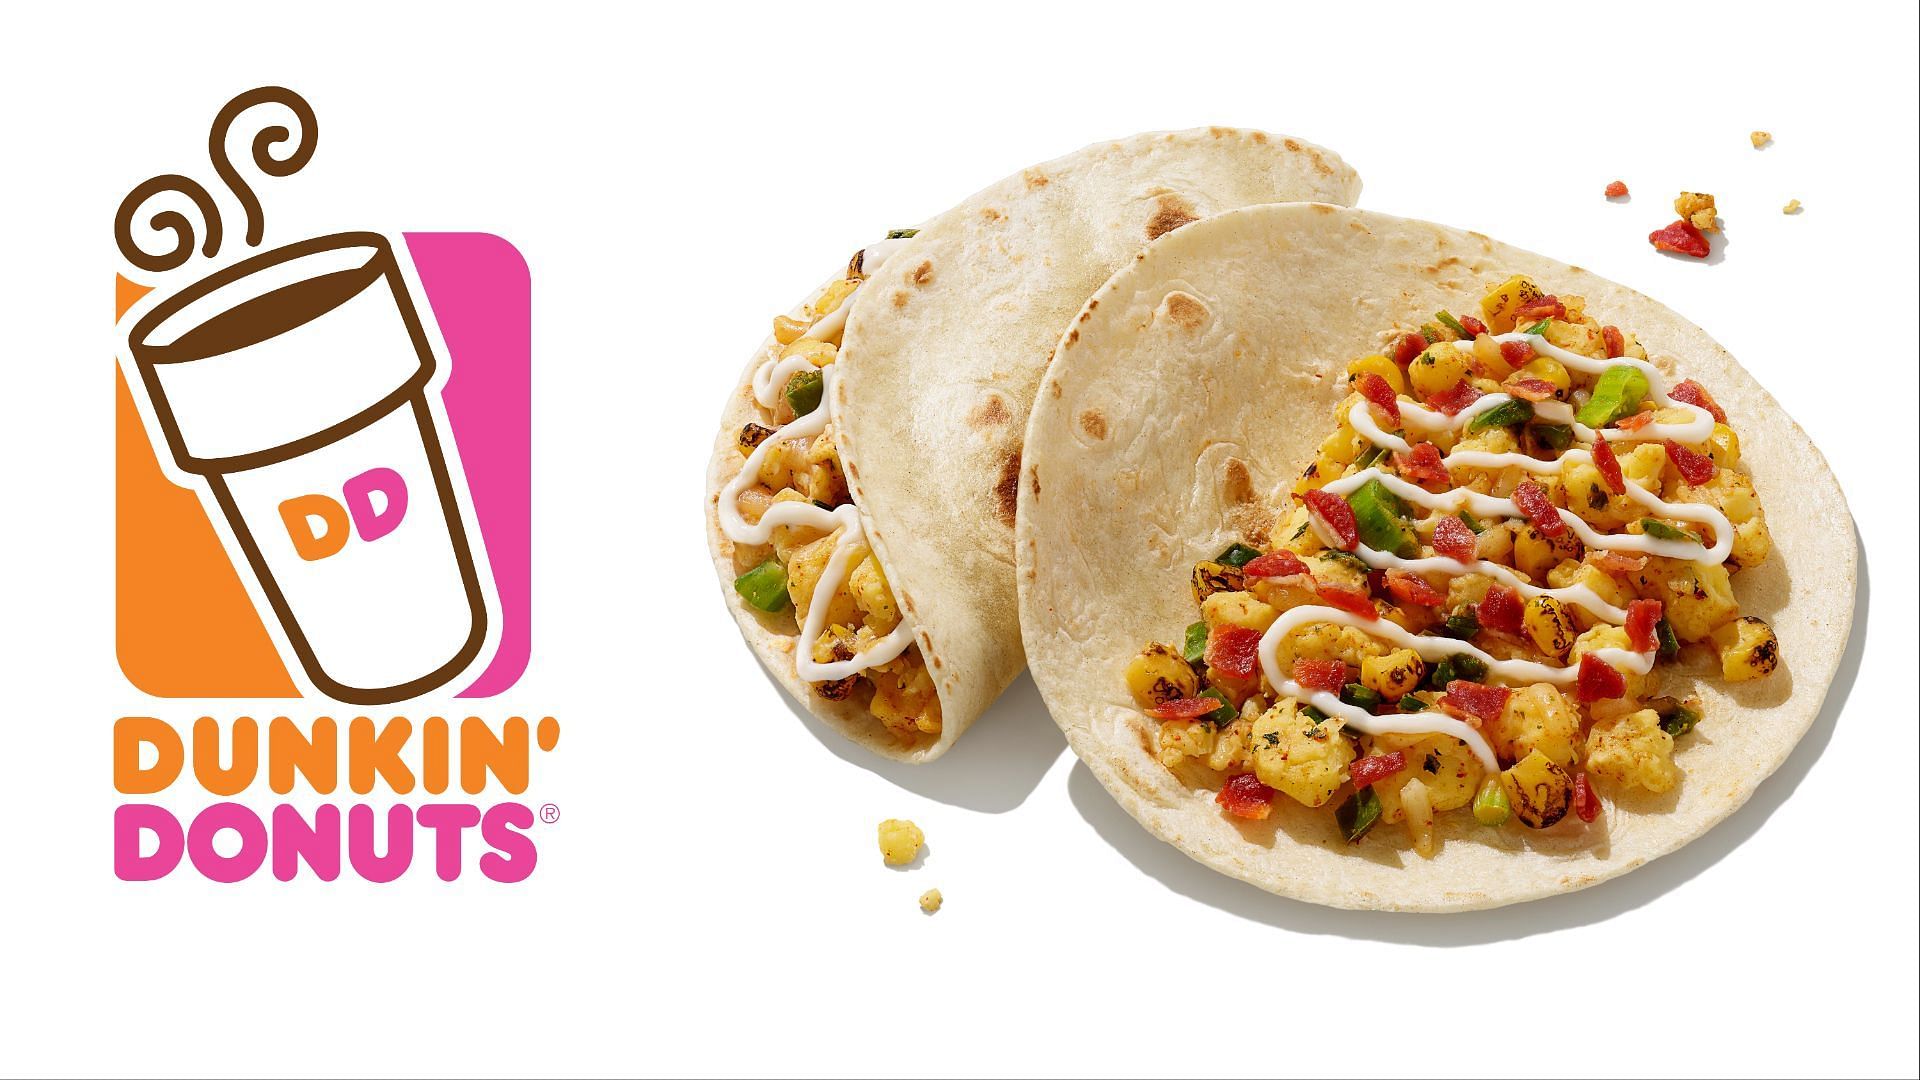 Dunkin introduces new Breakfast Tacos in stores starting March 22, 2023 (Image via Dunkin Donuts)